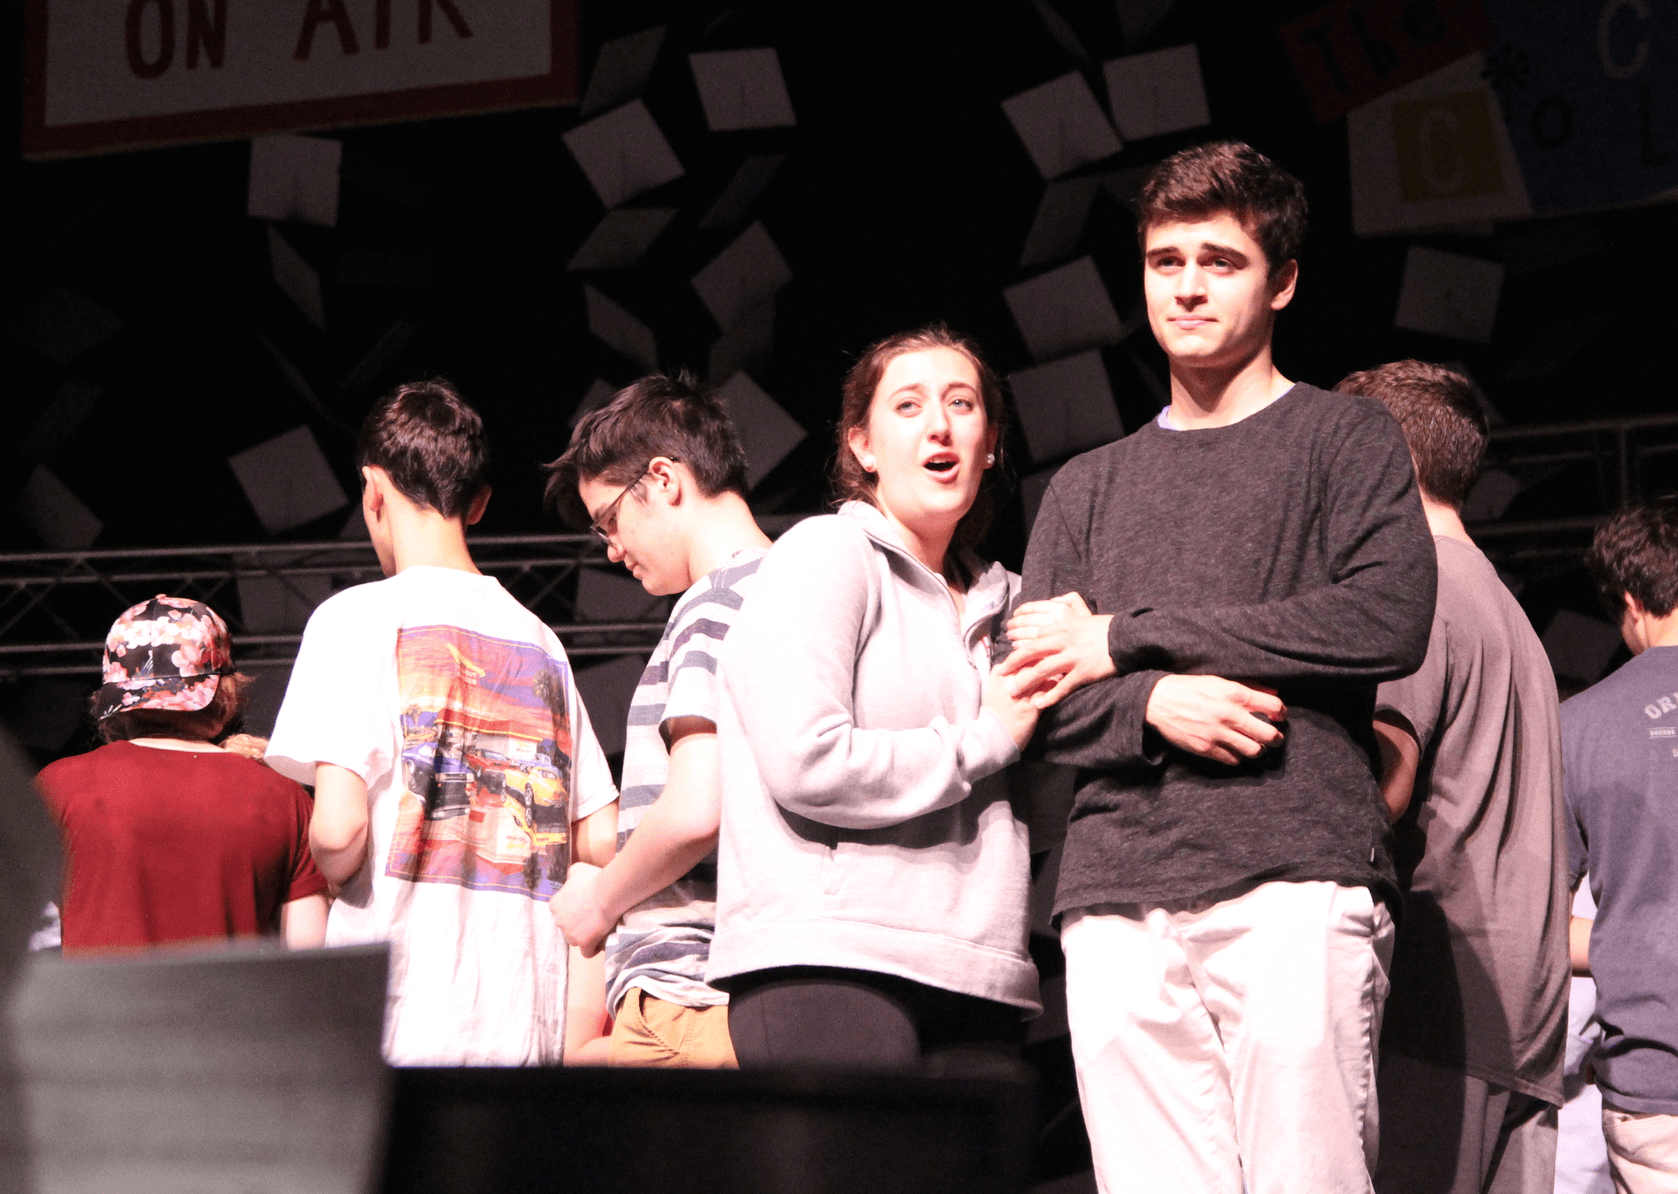 Cast and crew rehearsed for the GHS spring musical, Hairspray on May 10, 2018 Photo: Leslie Yager